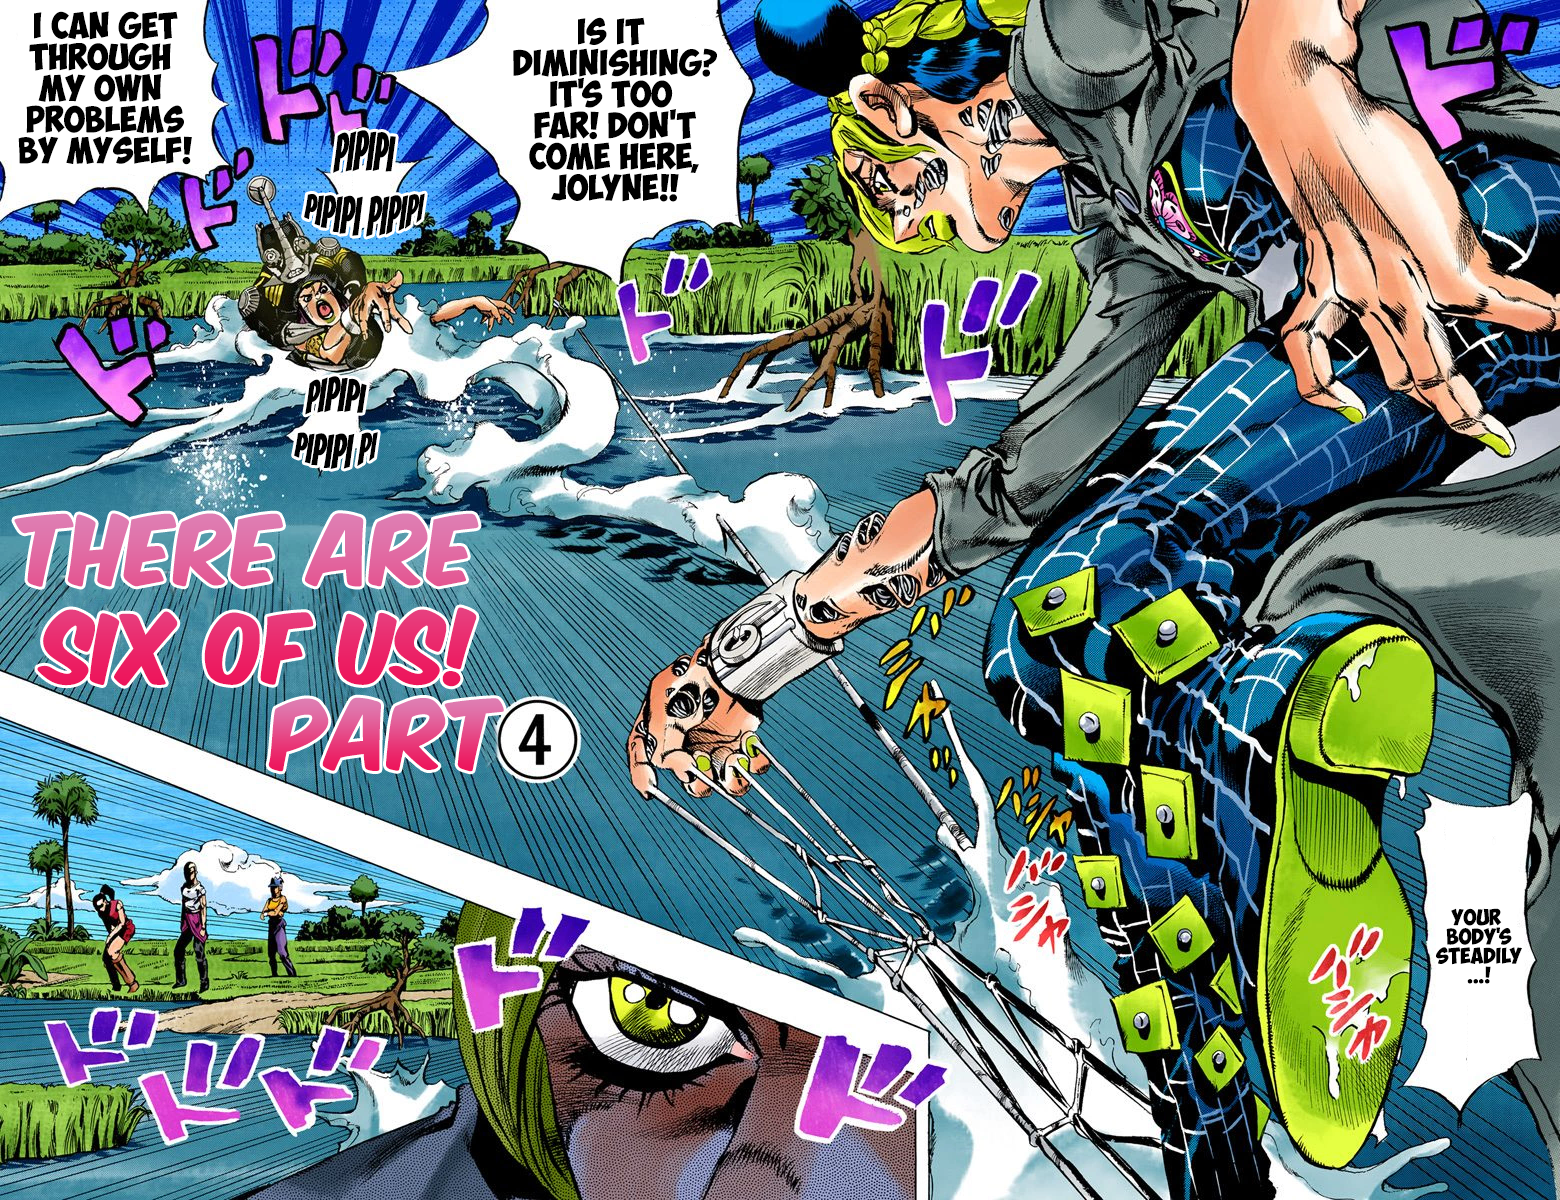 Jojo's Bizarre Adventure Part 5 - Vento Aureo Vol.4 Chapter 29: There Are Six Of Us! Part 4 - Picture 2